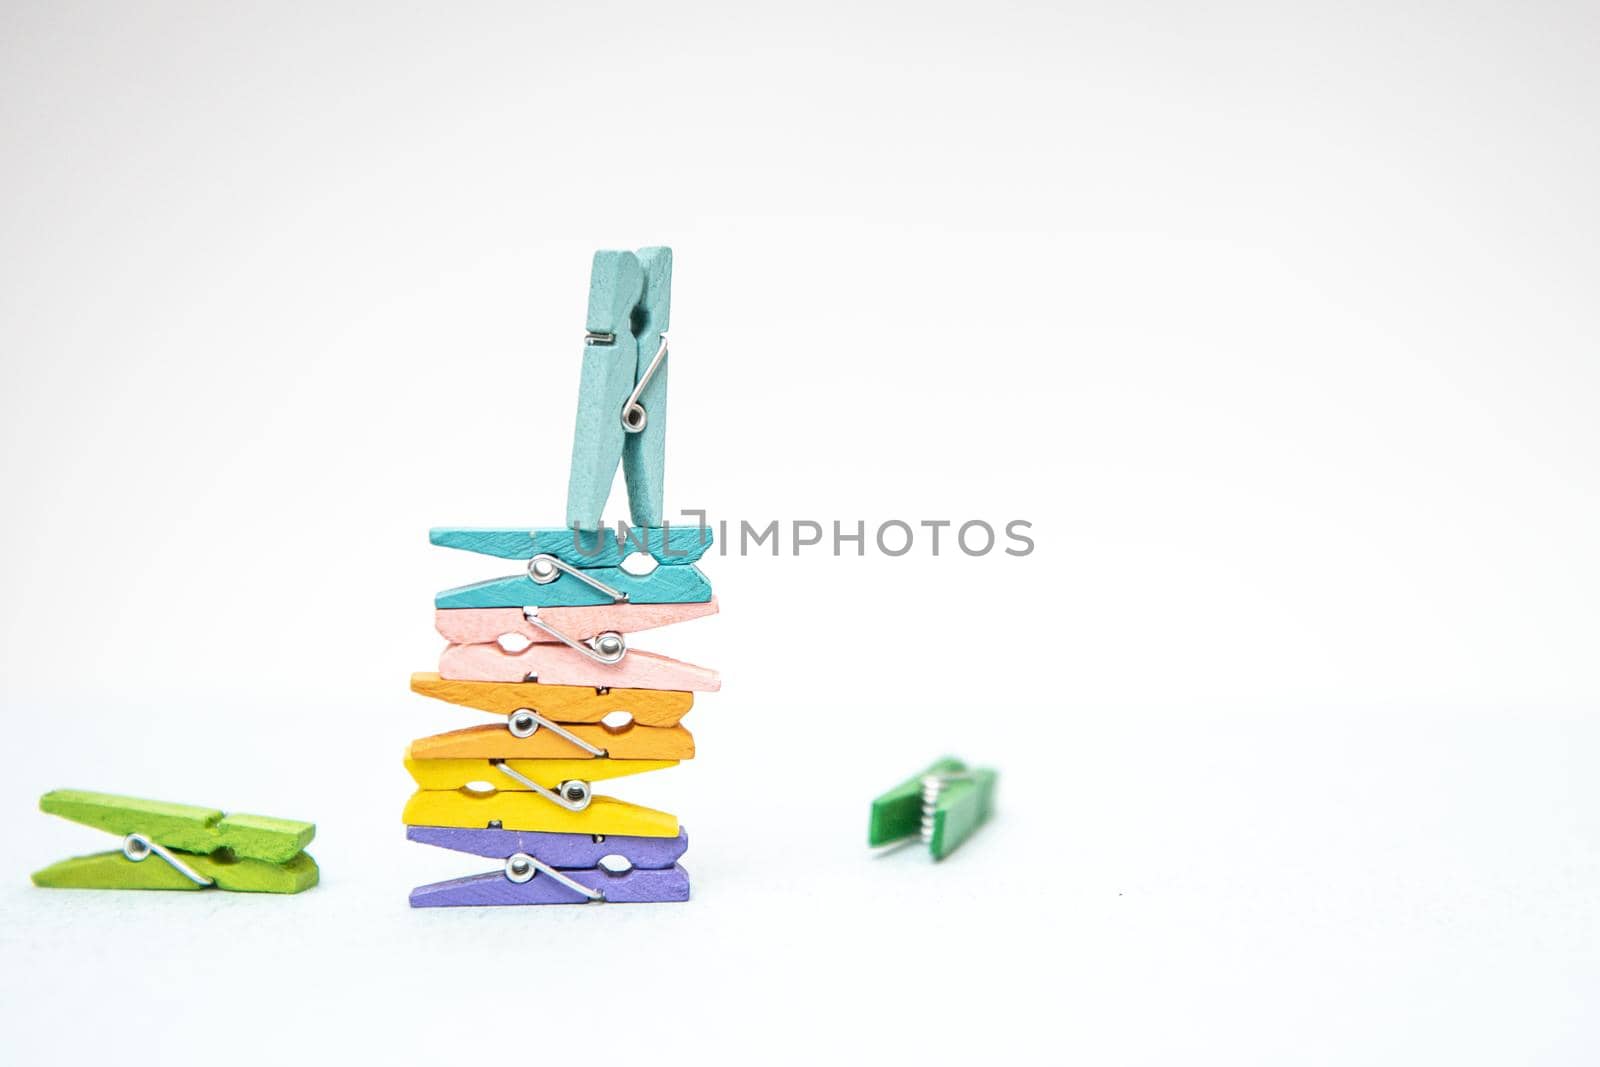 multi-colored clothespins for laundry on a white background by marynkin